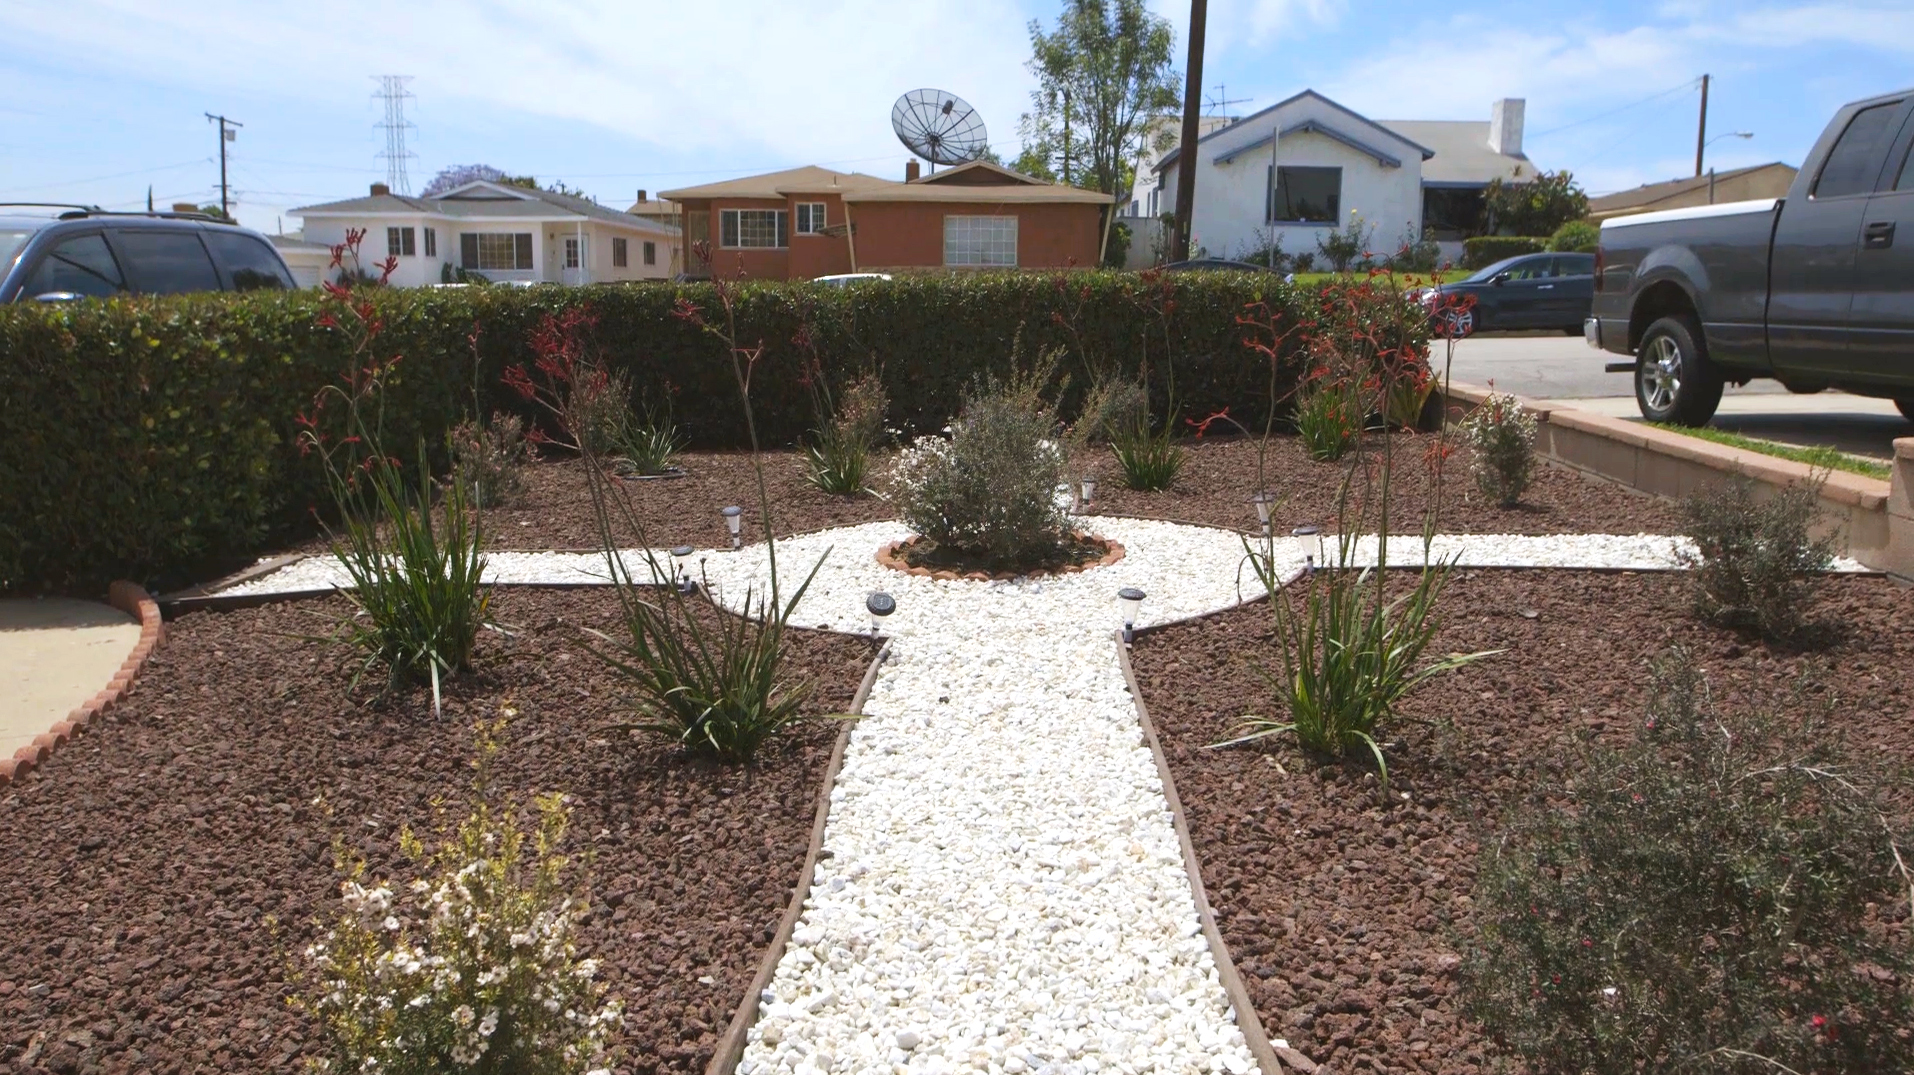 5 Water-Saving Ways to Replace Lawns During California’s Drought